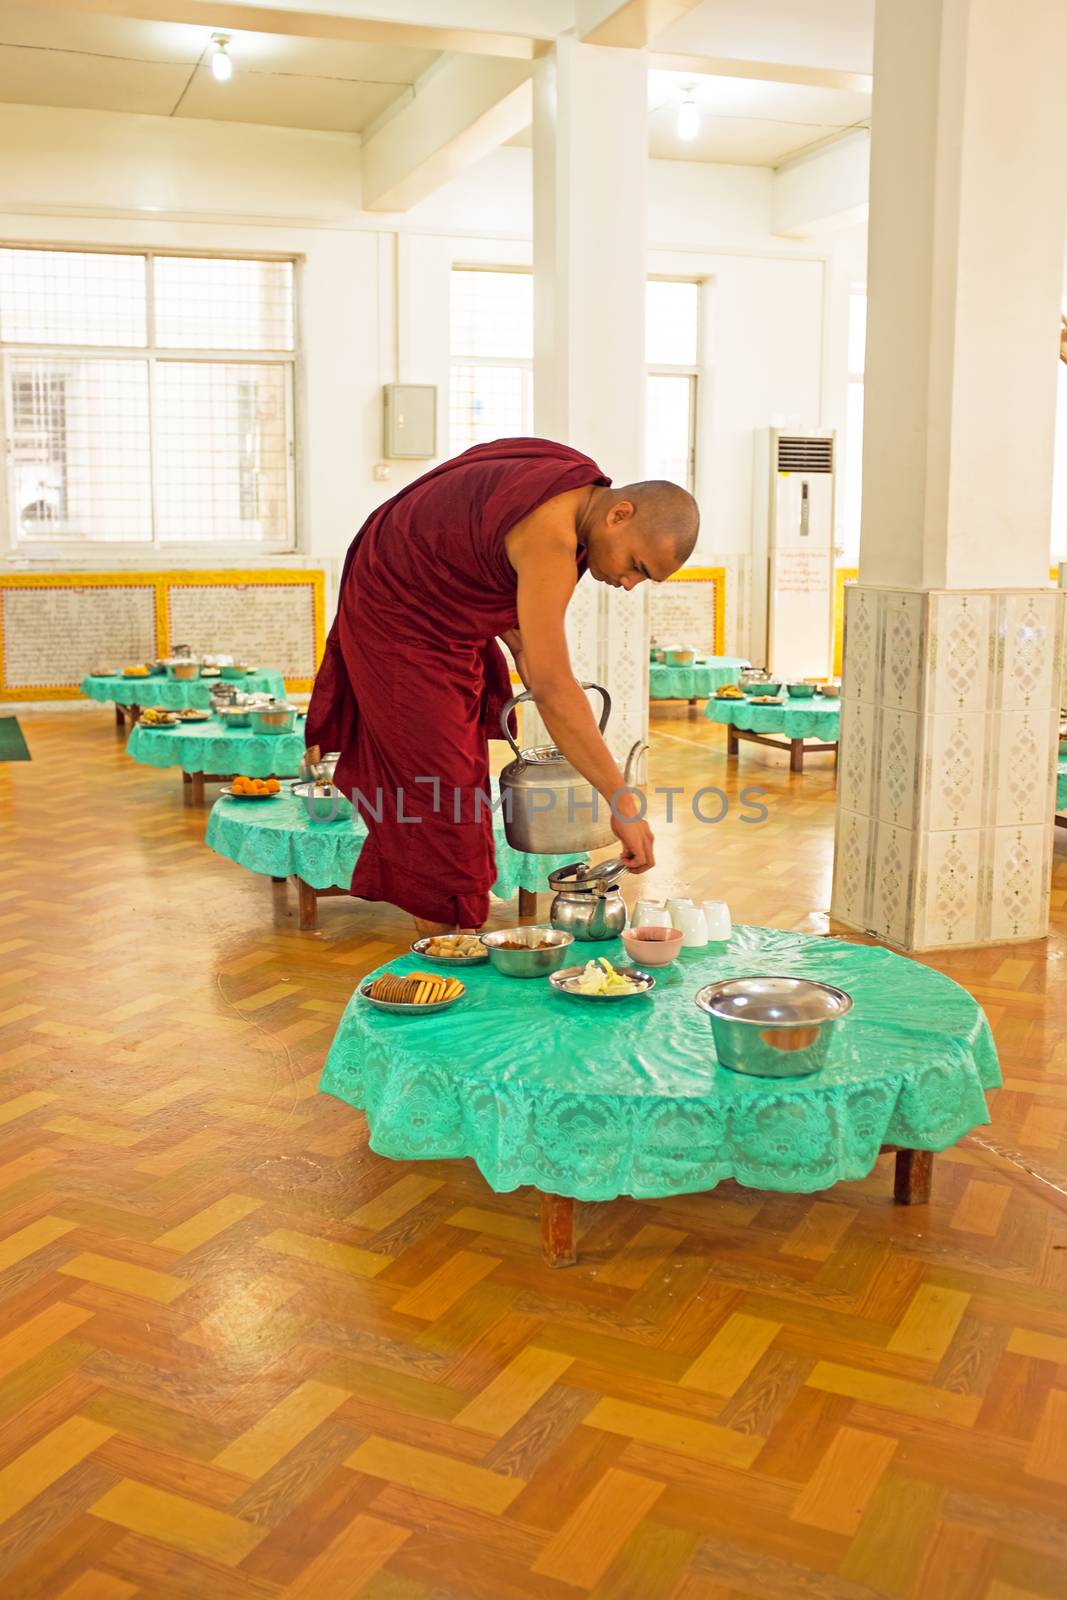 BAGO, MYANMAR -November 26, 2015: Monk serving tea in the monastery from Bago in Myanmar.
Buddhism in Myanmar is predominantly of the Theravada tradition, practised by 89% of the country's population. It is the most religious Buddhist country in terms of the proportion of monks in the population and proportion of income spent on religion

